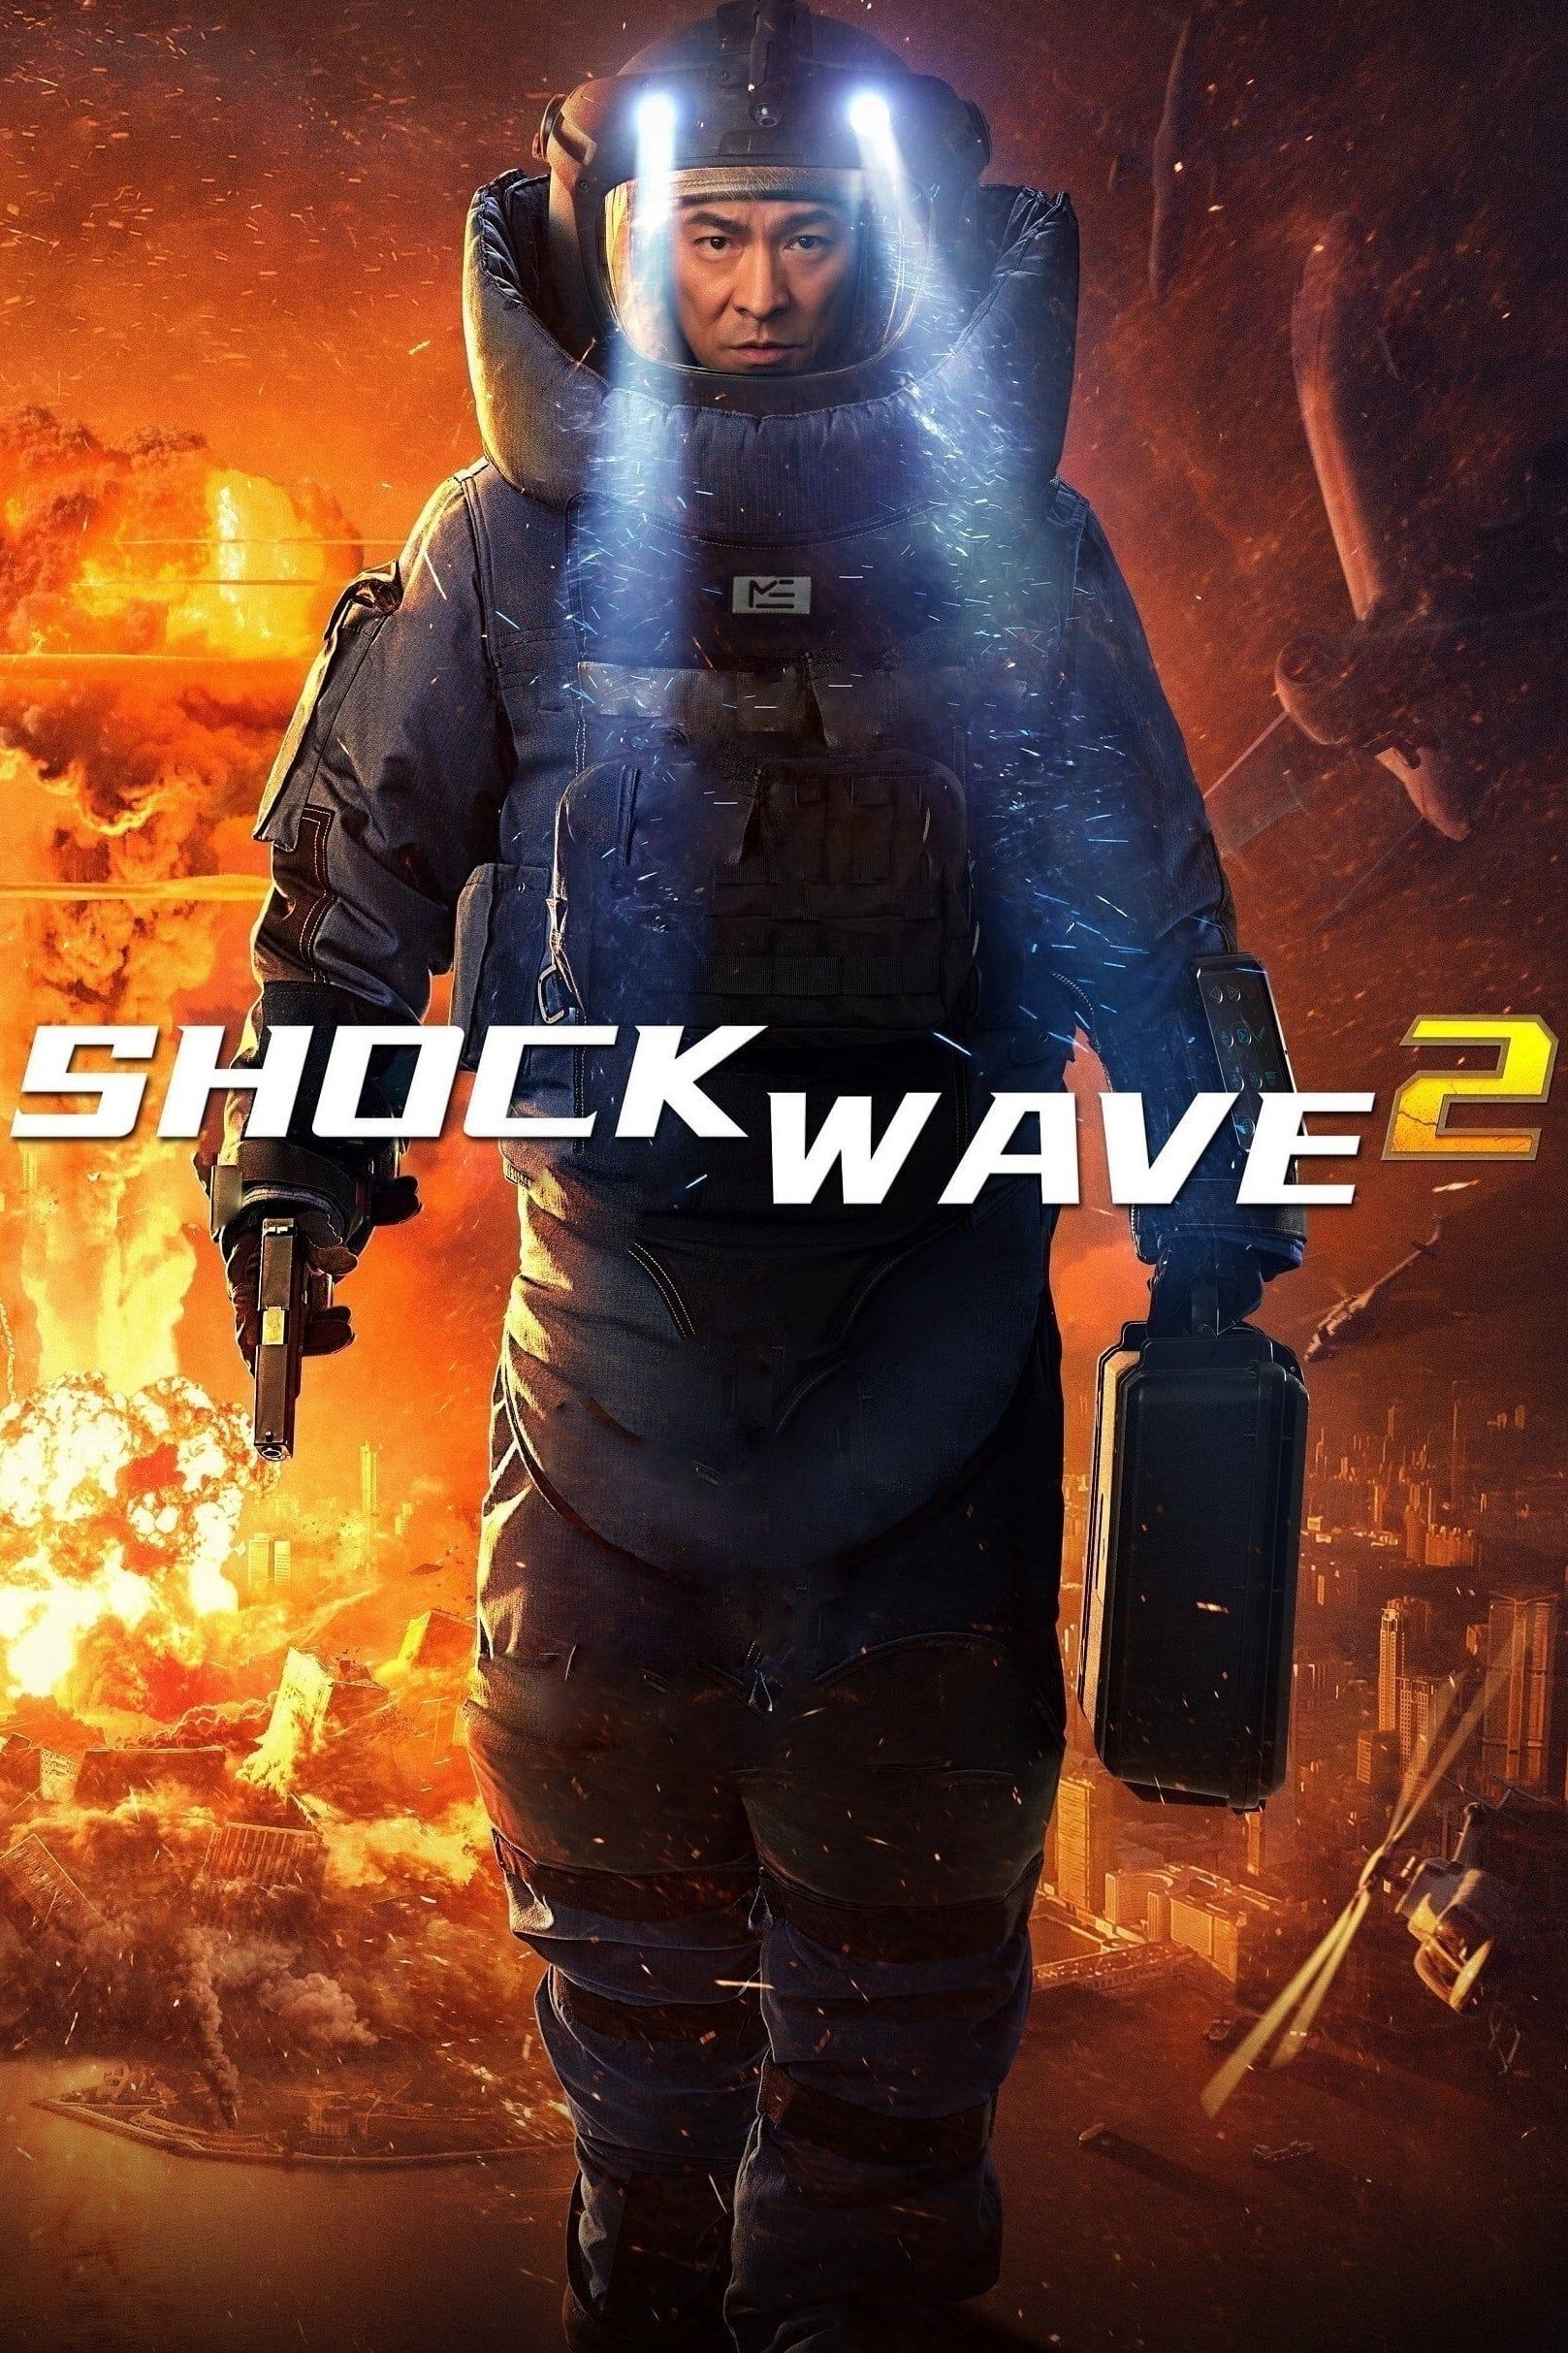 Shock Wave 2 (2020) Hindi Dubbed BluRay download full movie